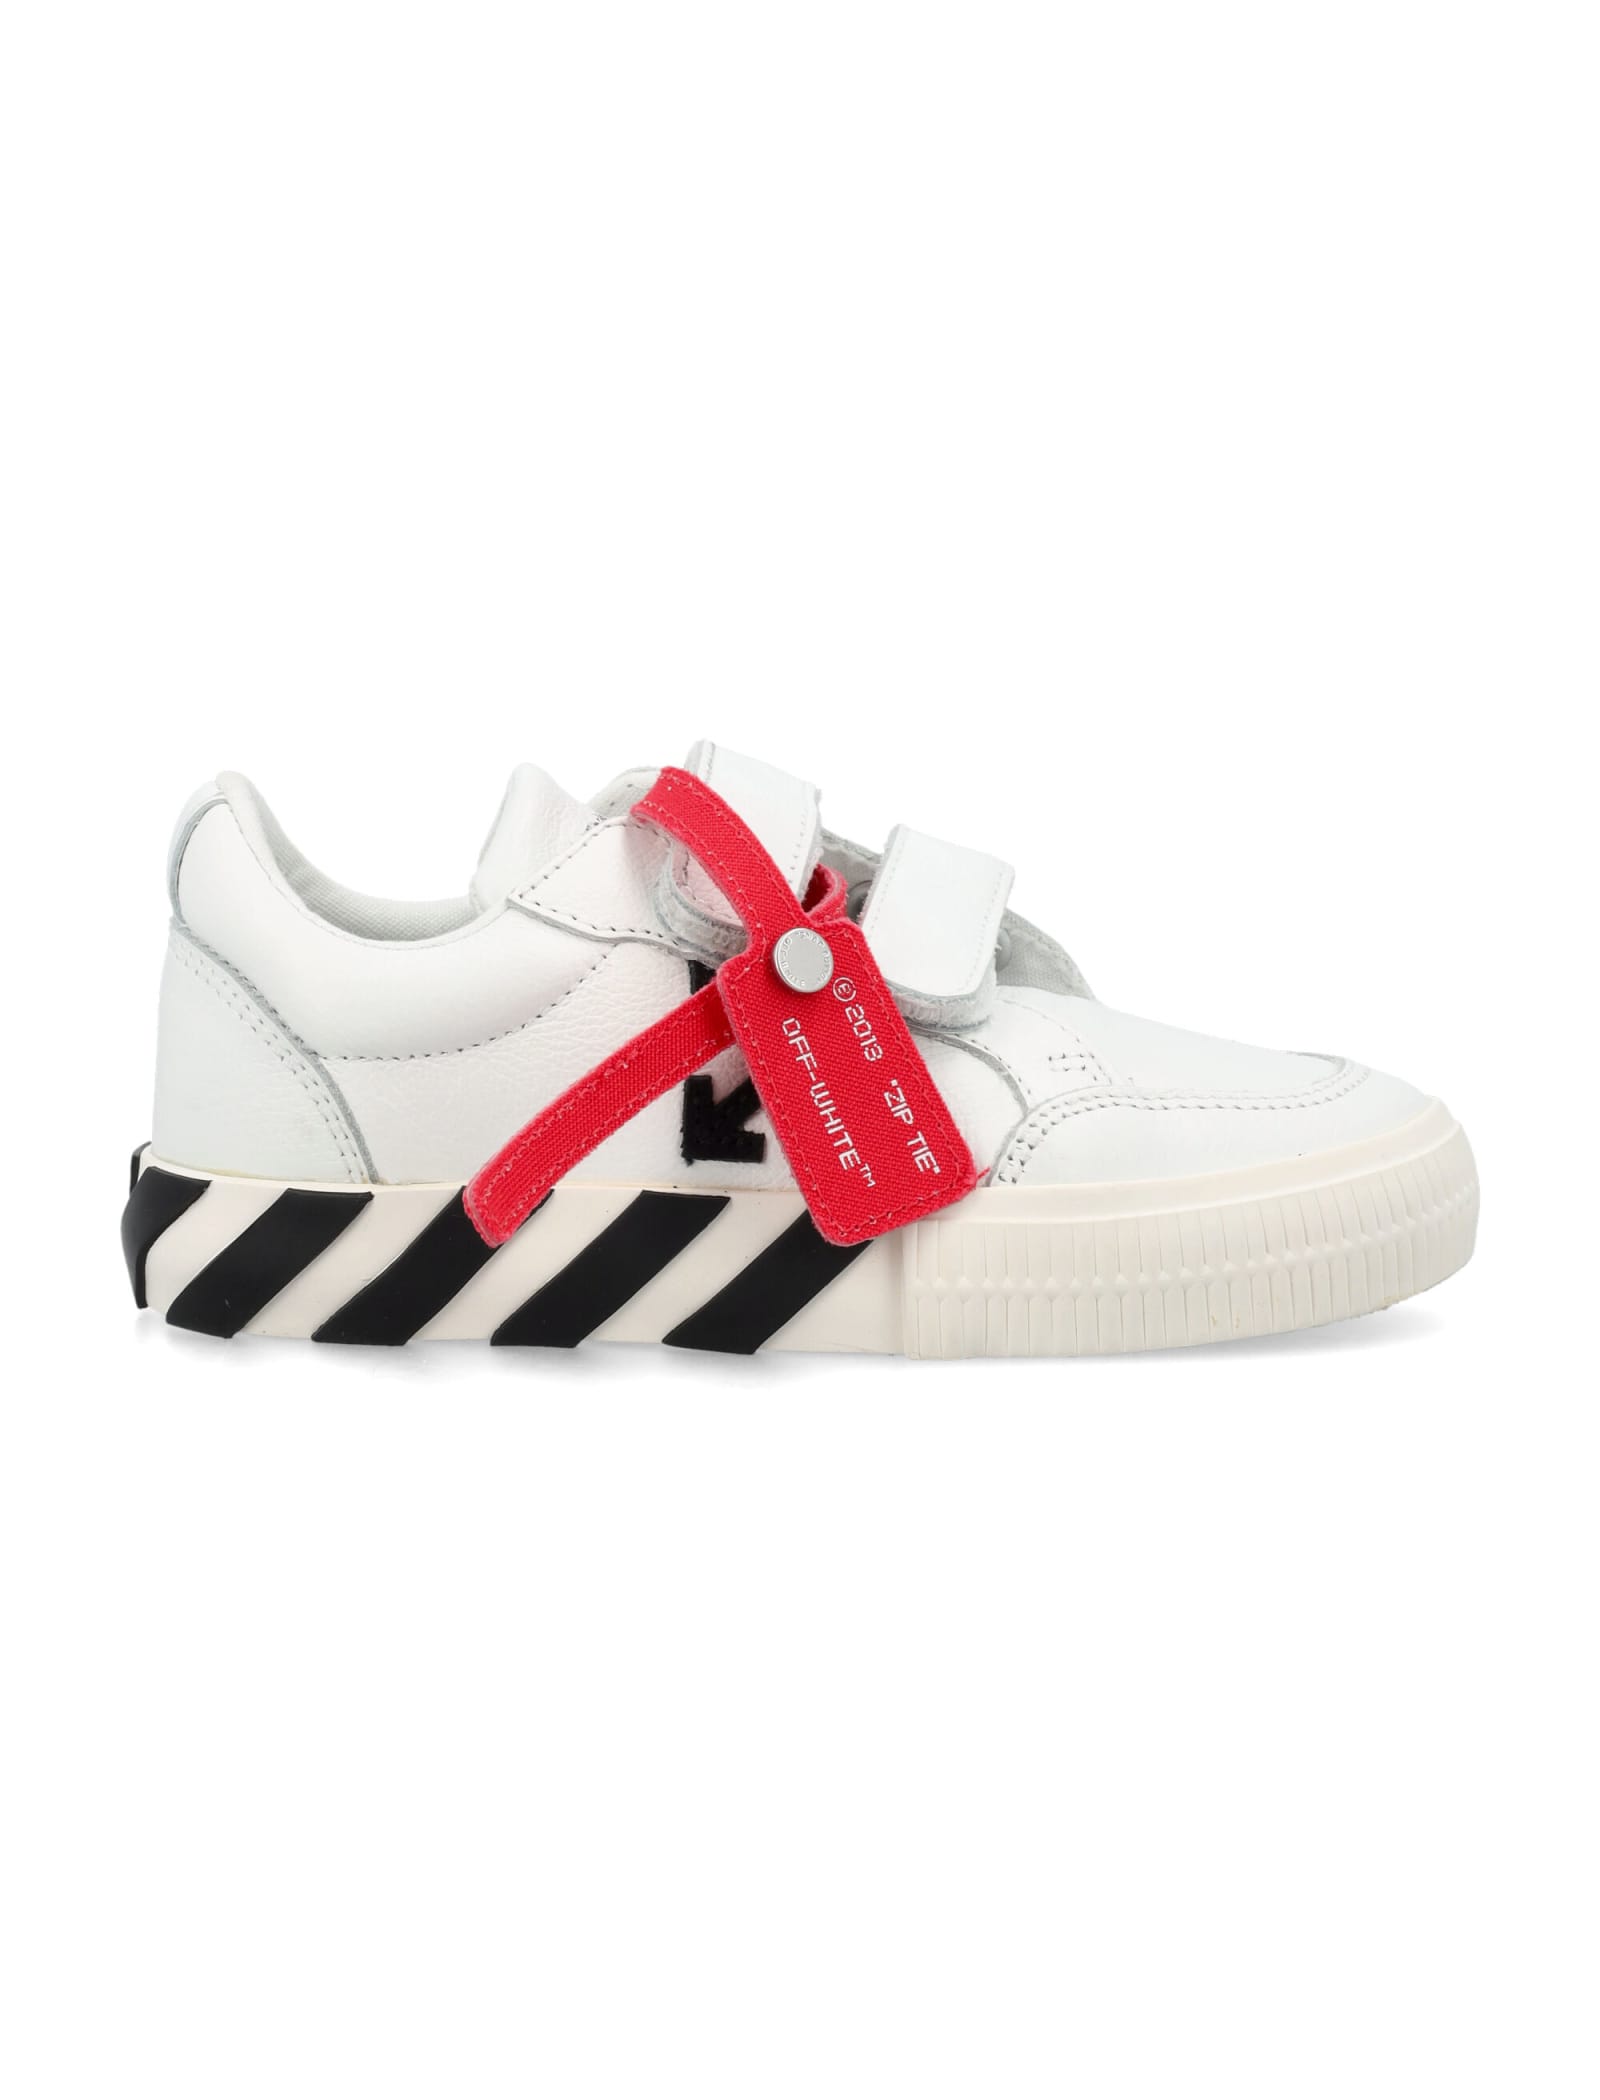 Off-White Strap Vulcanized Sneakers